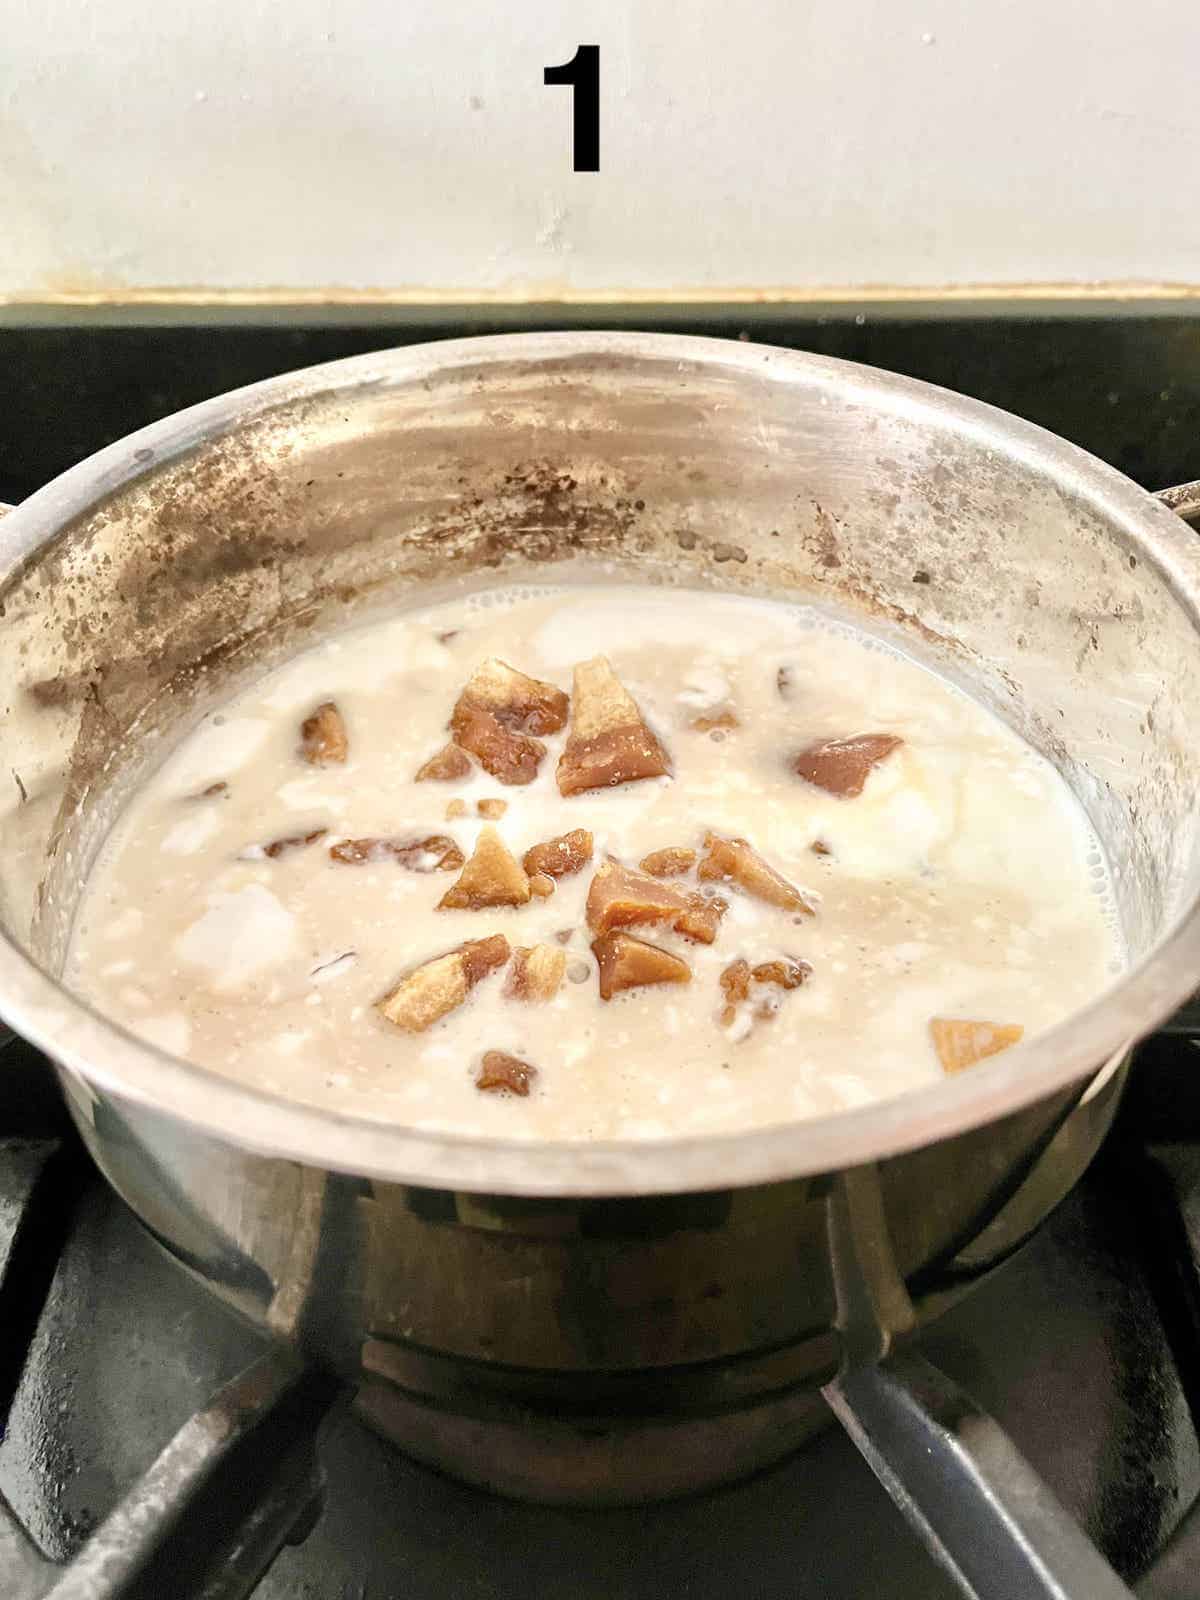 Coconut milk, gula melaka sugar and water being cooked down in a pot.